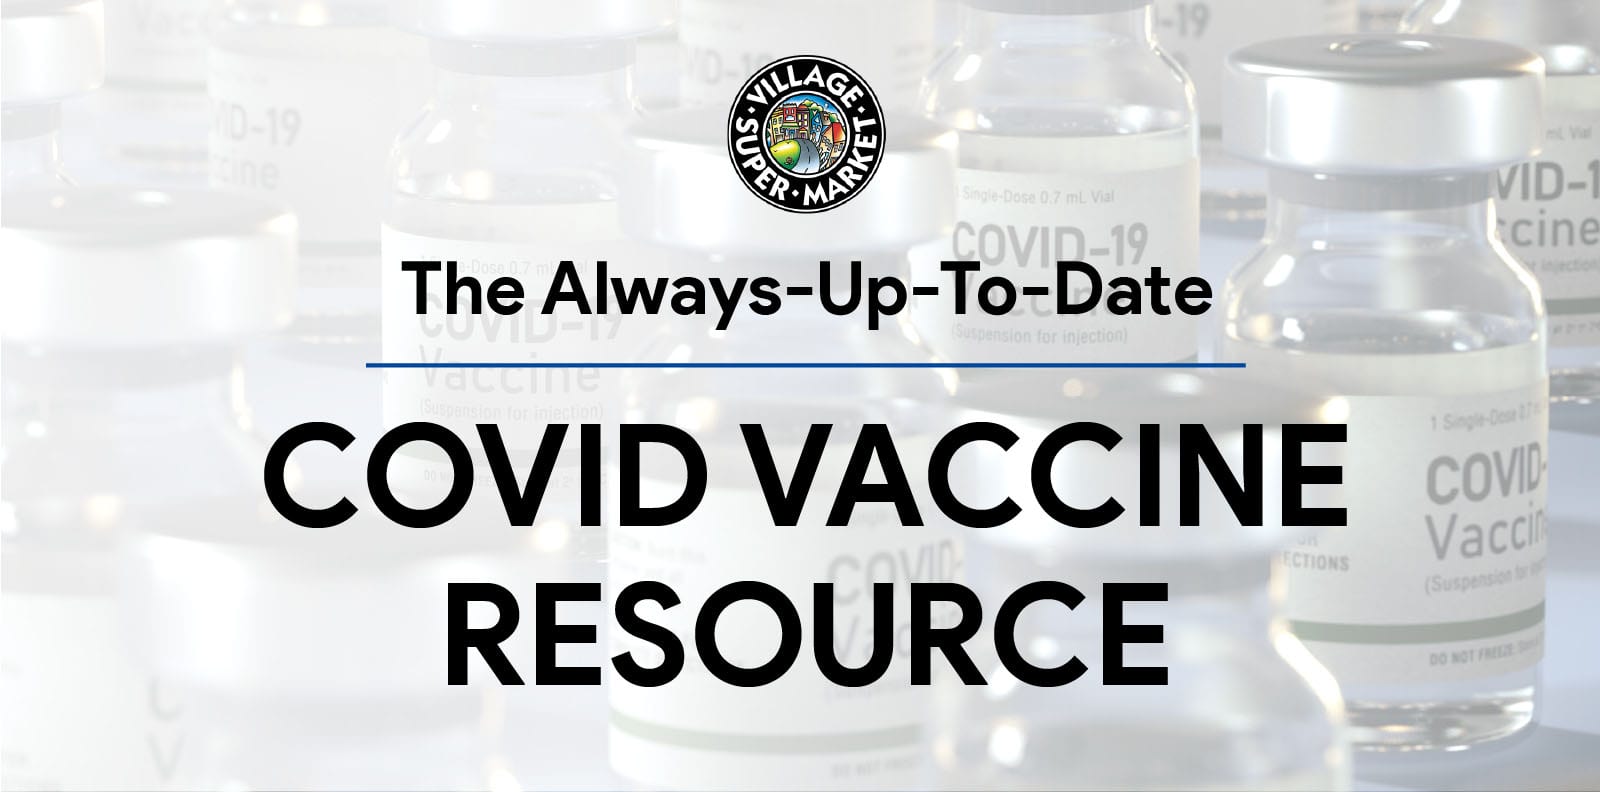 The Always-Up-To-Date COVID Vaccine Resource